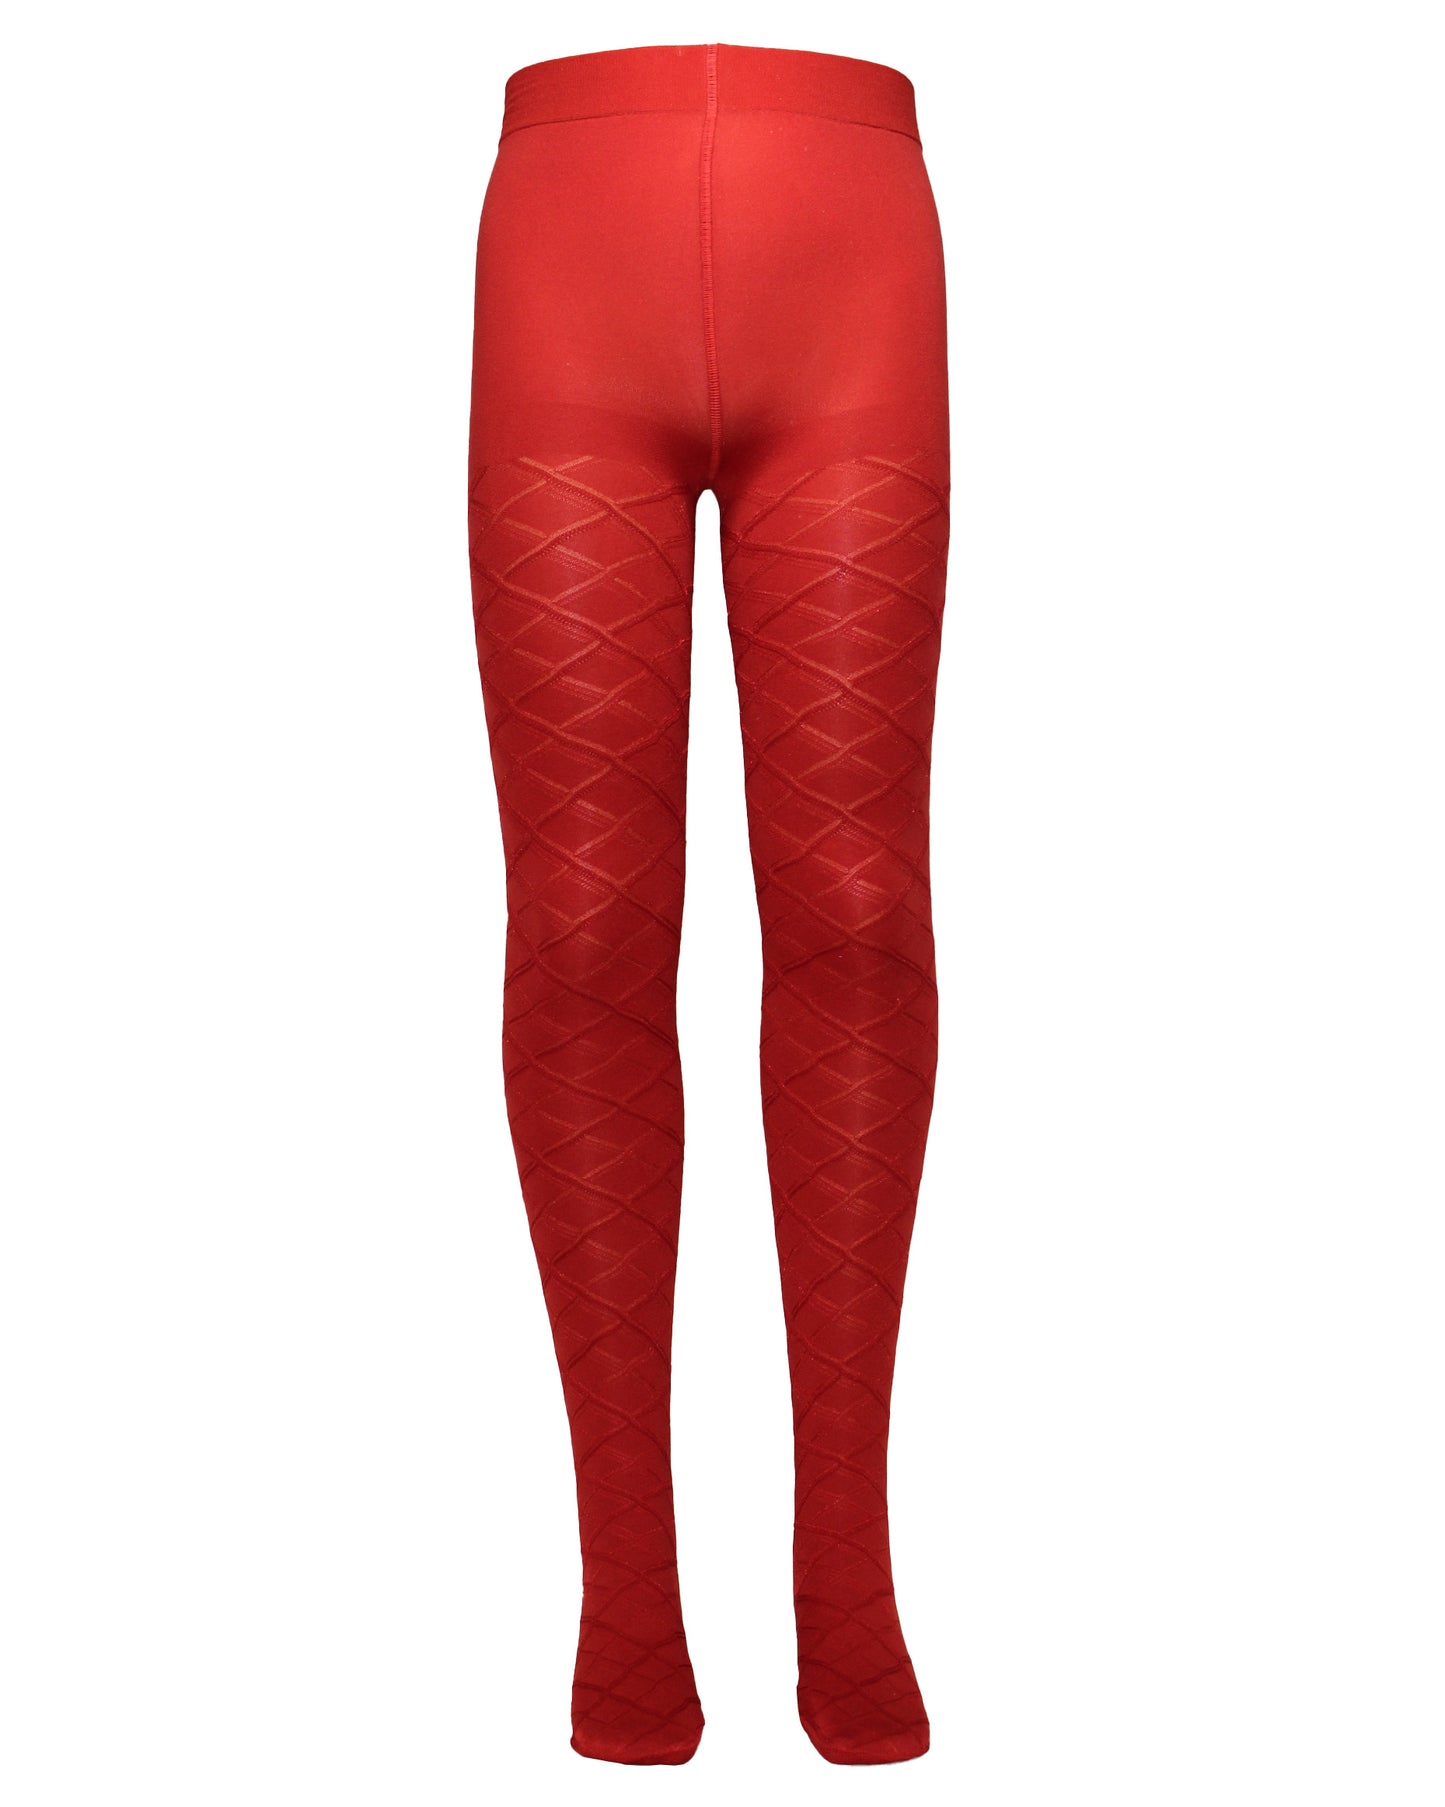 Omsa Serenella Lily Collant - Bright red opaque children's tights with a woven glossy diamond shape pattern, plain top and deep comfort waist band.